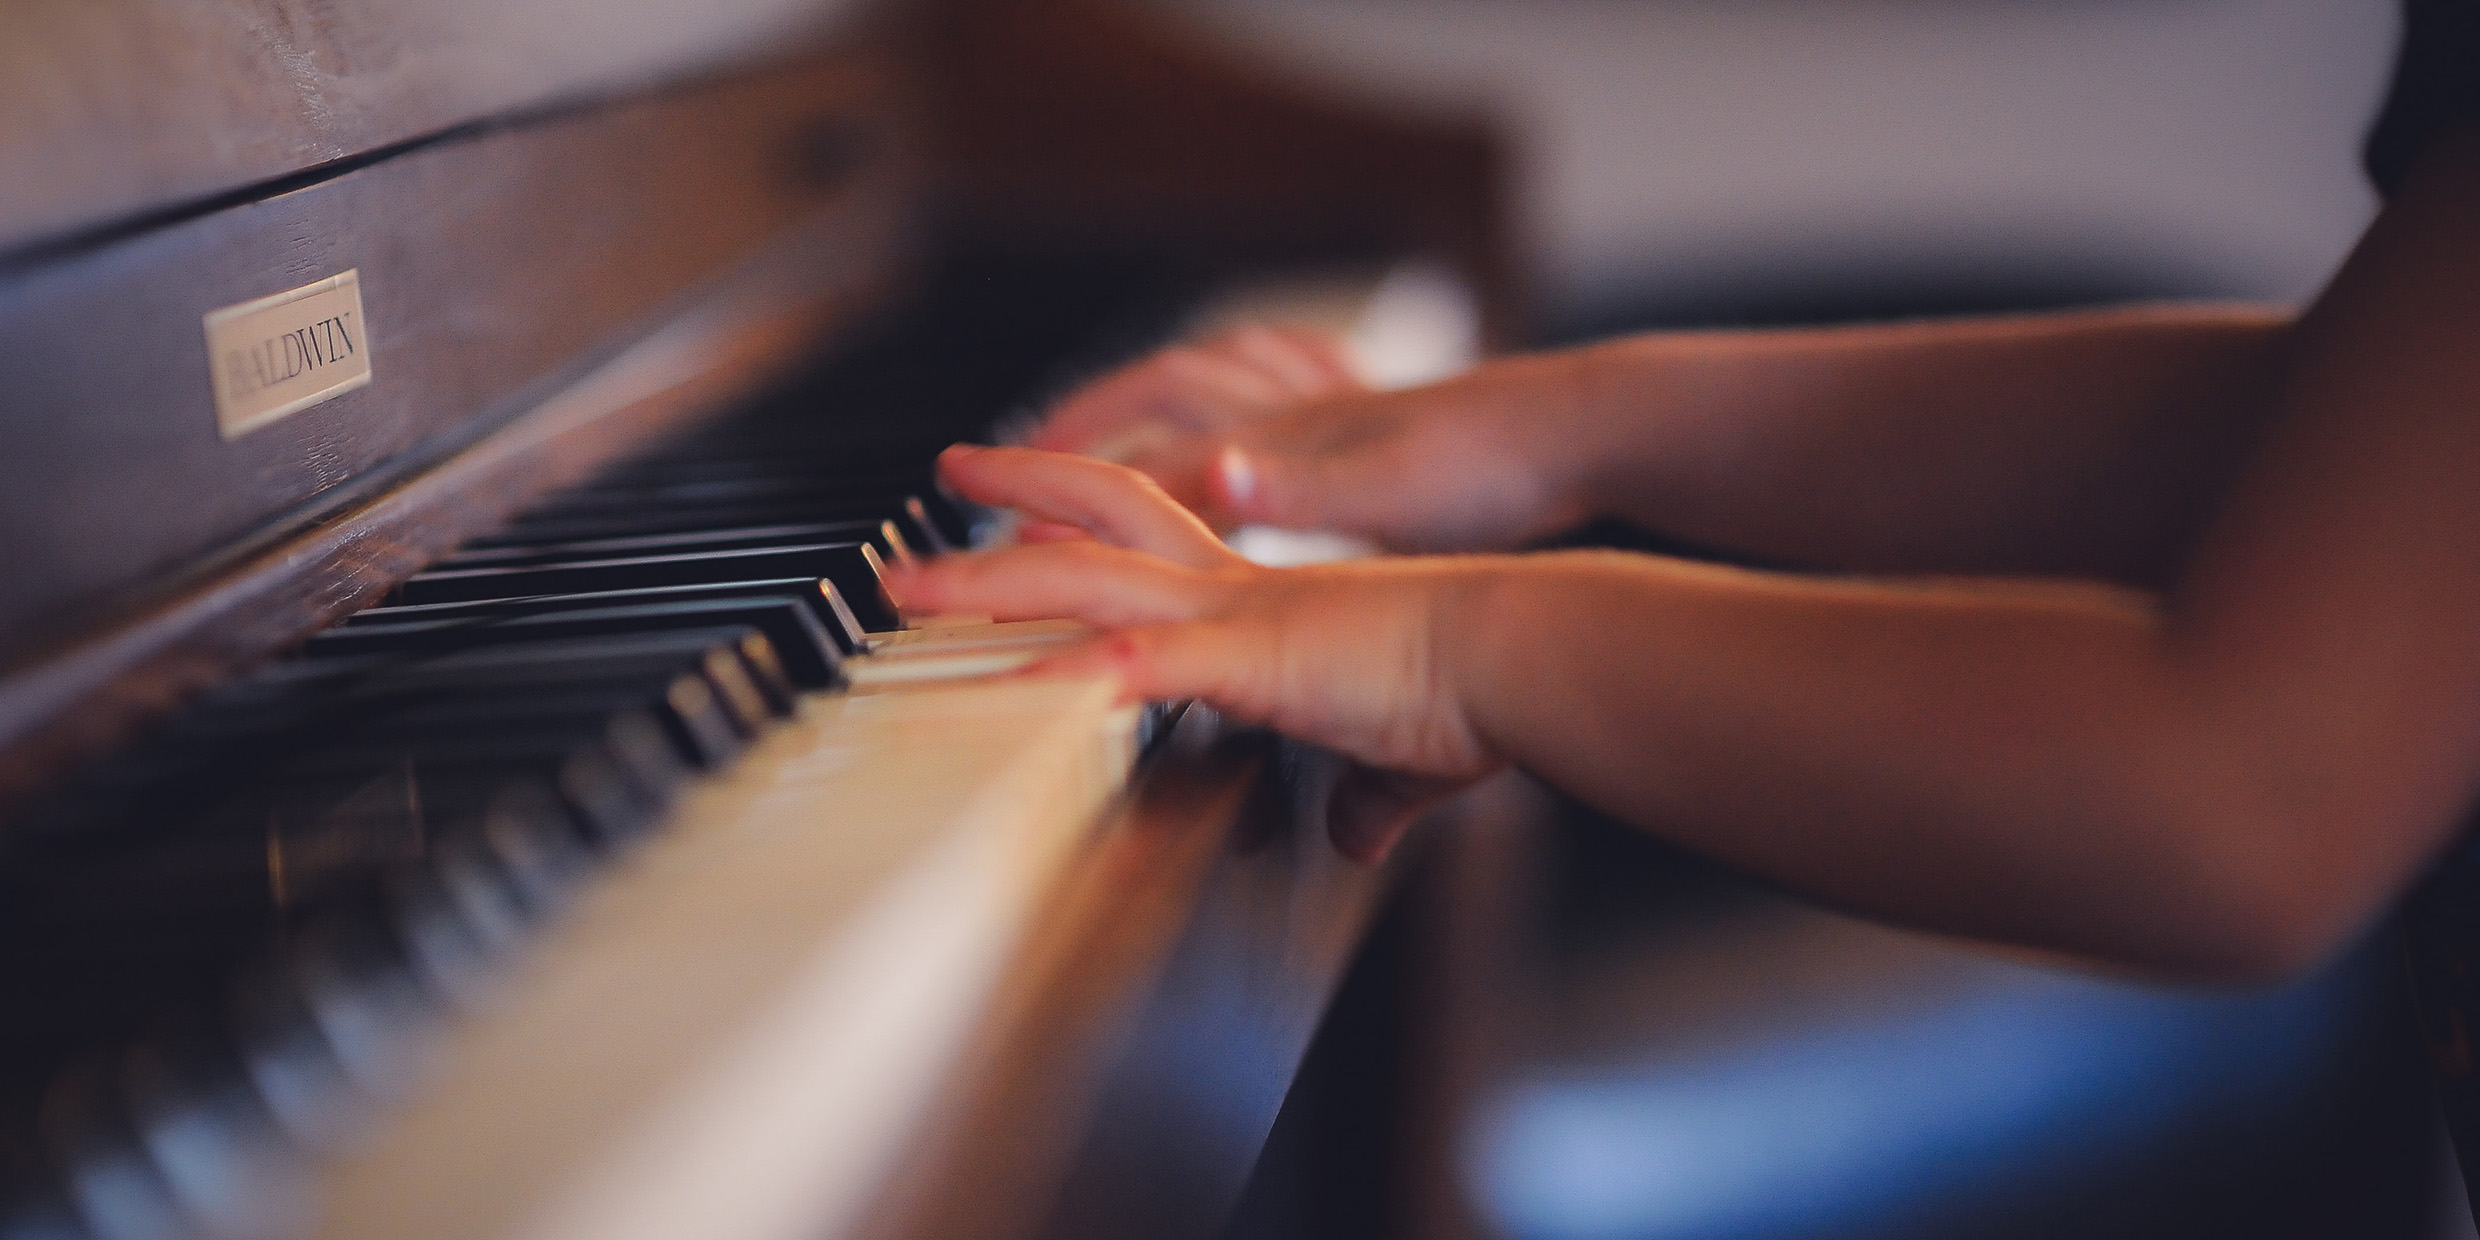 Image of the hands of a young child playing a piano